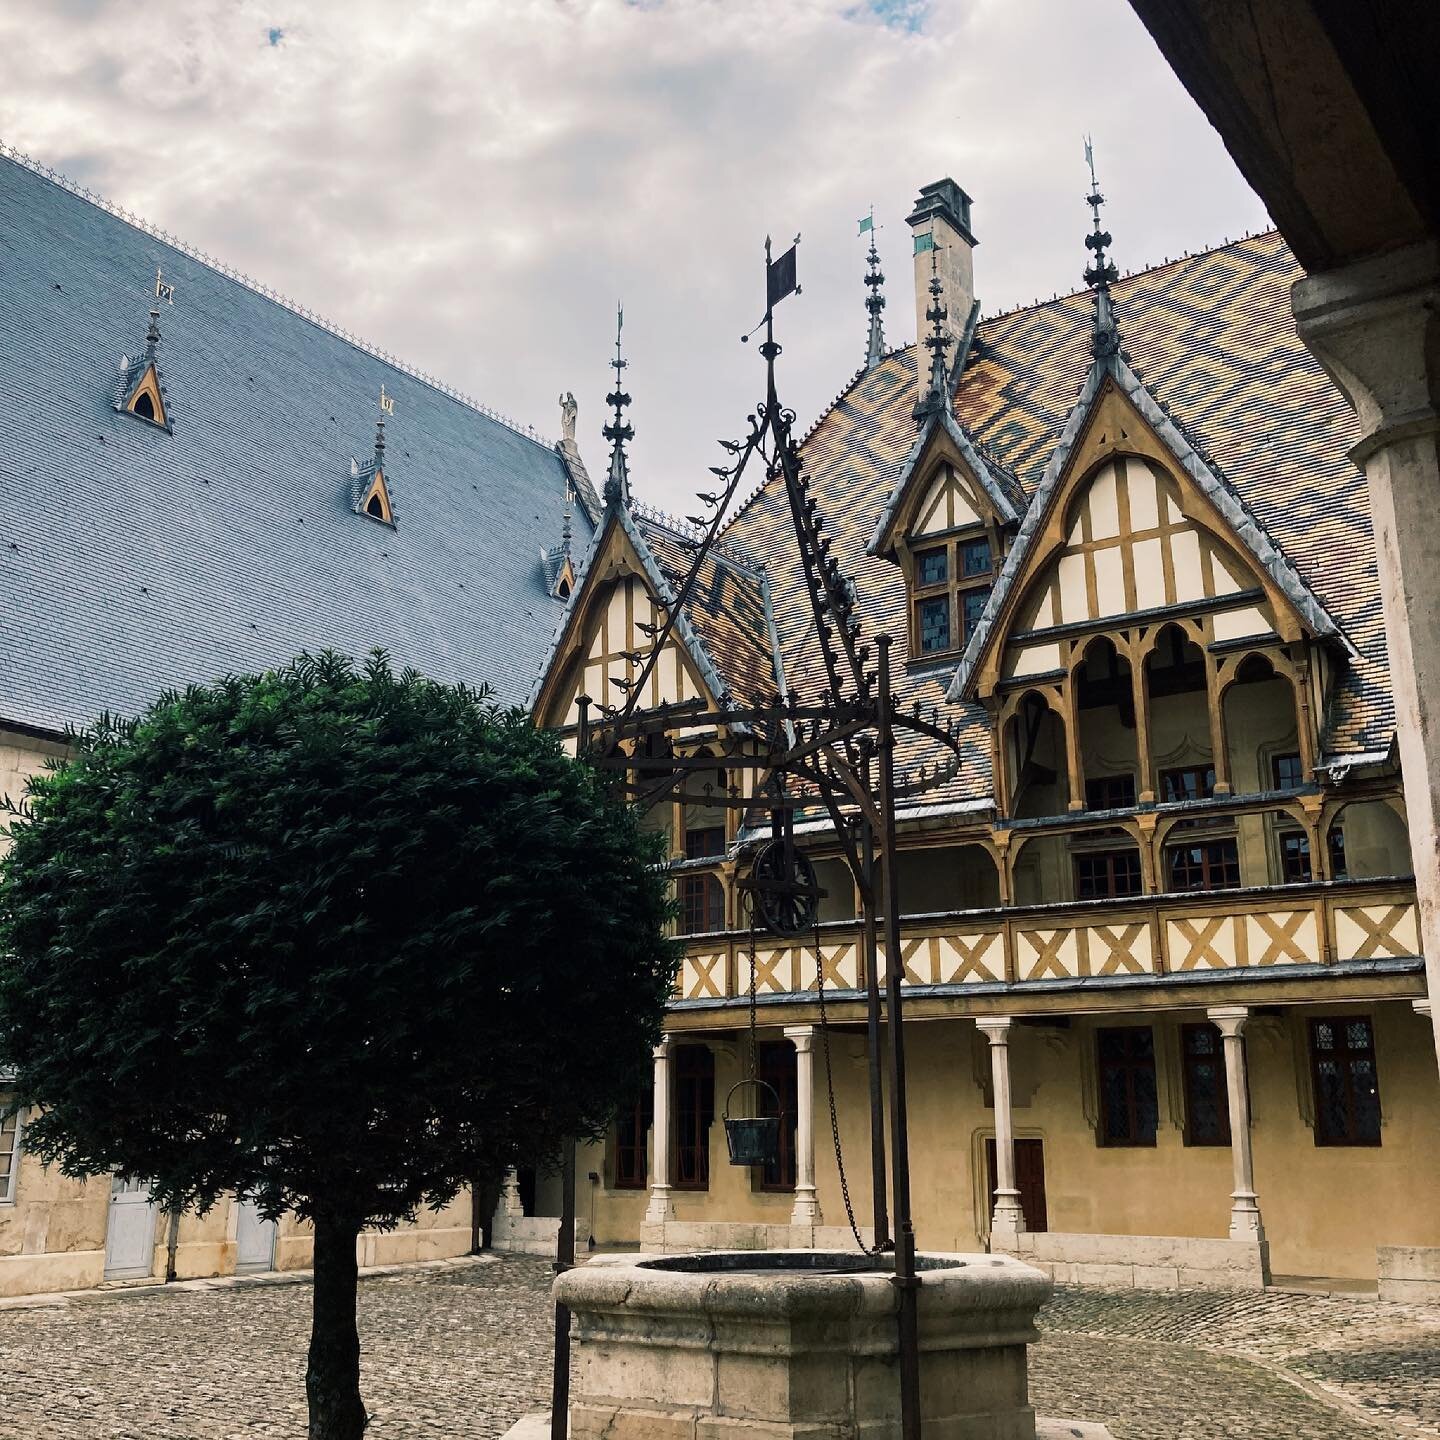 The most symbolic vaccination center: les Hospices de Beaune. It&rsquo;s history begins in 1443 when Nicolas Rolin and Guigone de Saluns created a charitable hospital for the people of Burgundy: l&rsquo;h&ocirc;tel Dieu. The site received the sick un